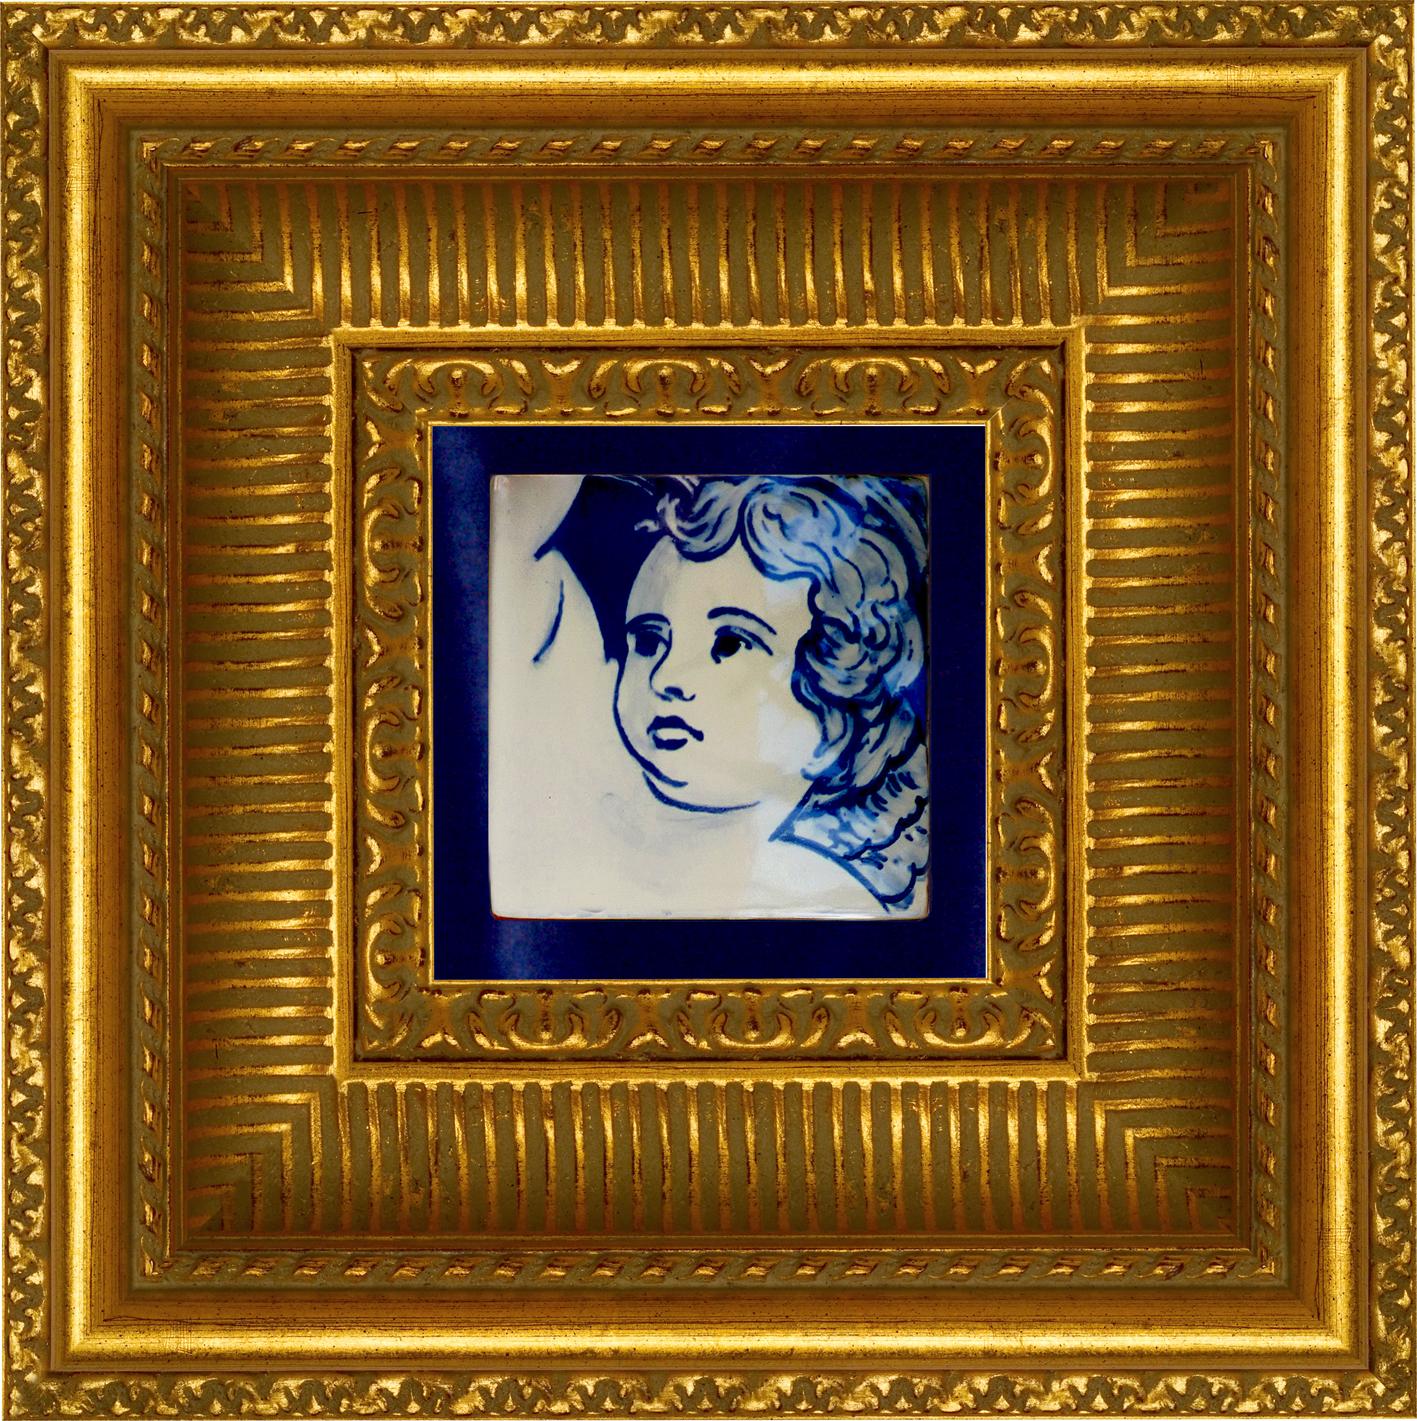 Gorgeous blue hand painted baroque cherub or angel 18th century style Portuguese ceramic tile or azulejo.
The tile painted in cobalt blue over white in typical 18th century Portugal set the taste for monumental ceramic tile applications in churches